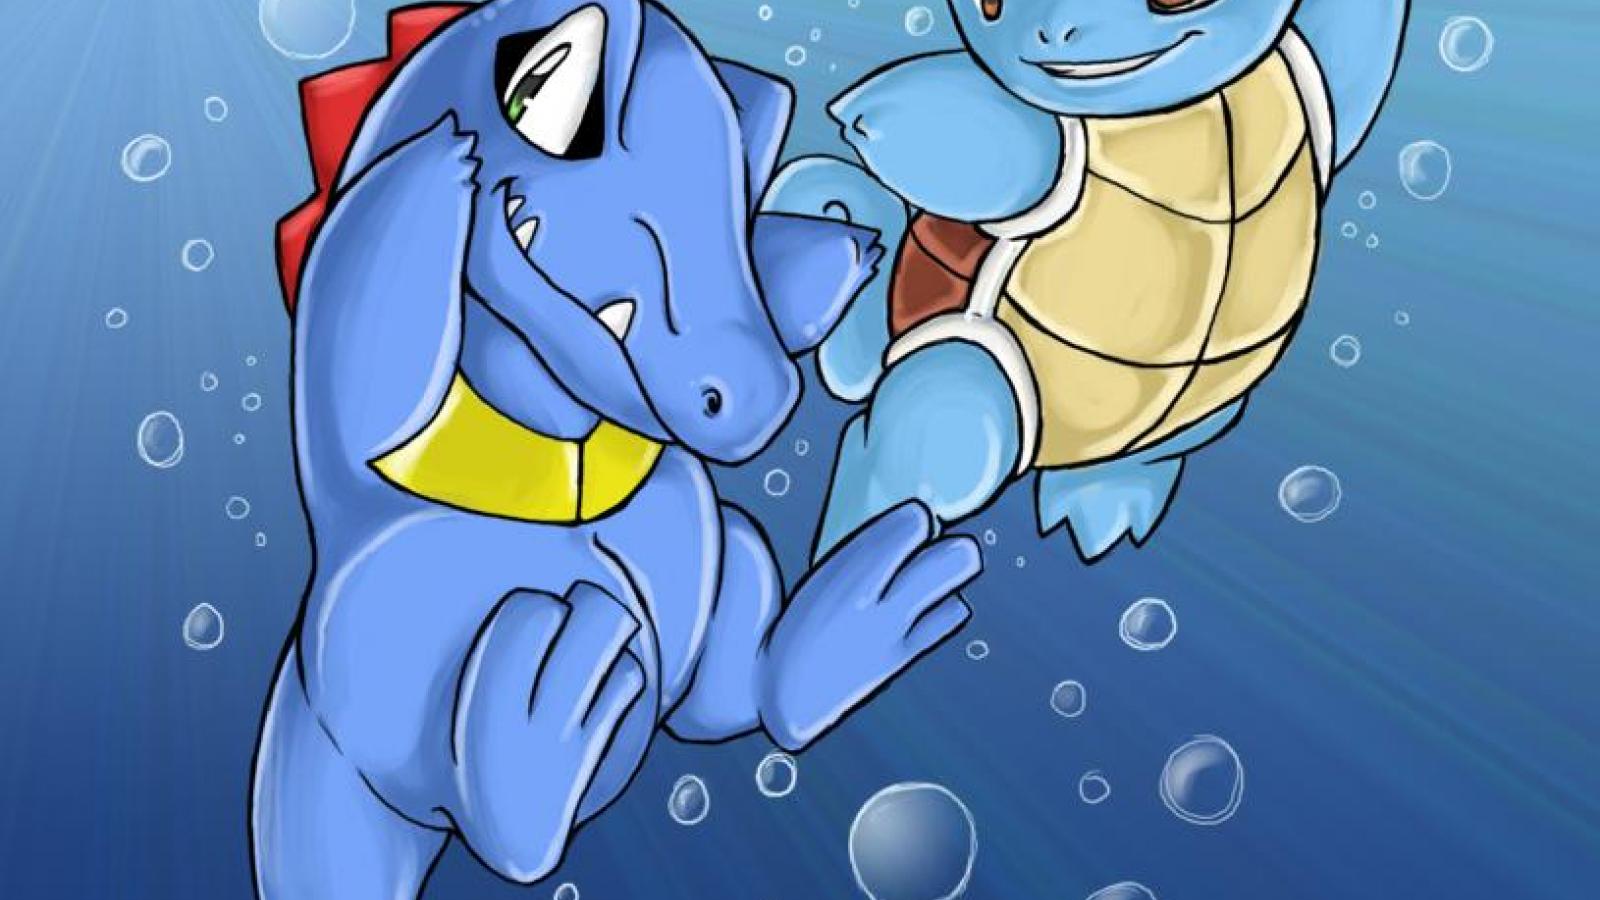 TOTODILE AND SQUIRTLE WALLPAPER - - HD Wallpapers